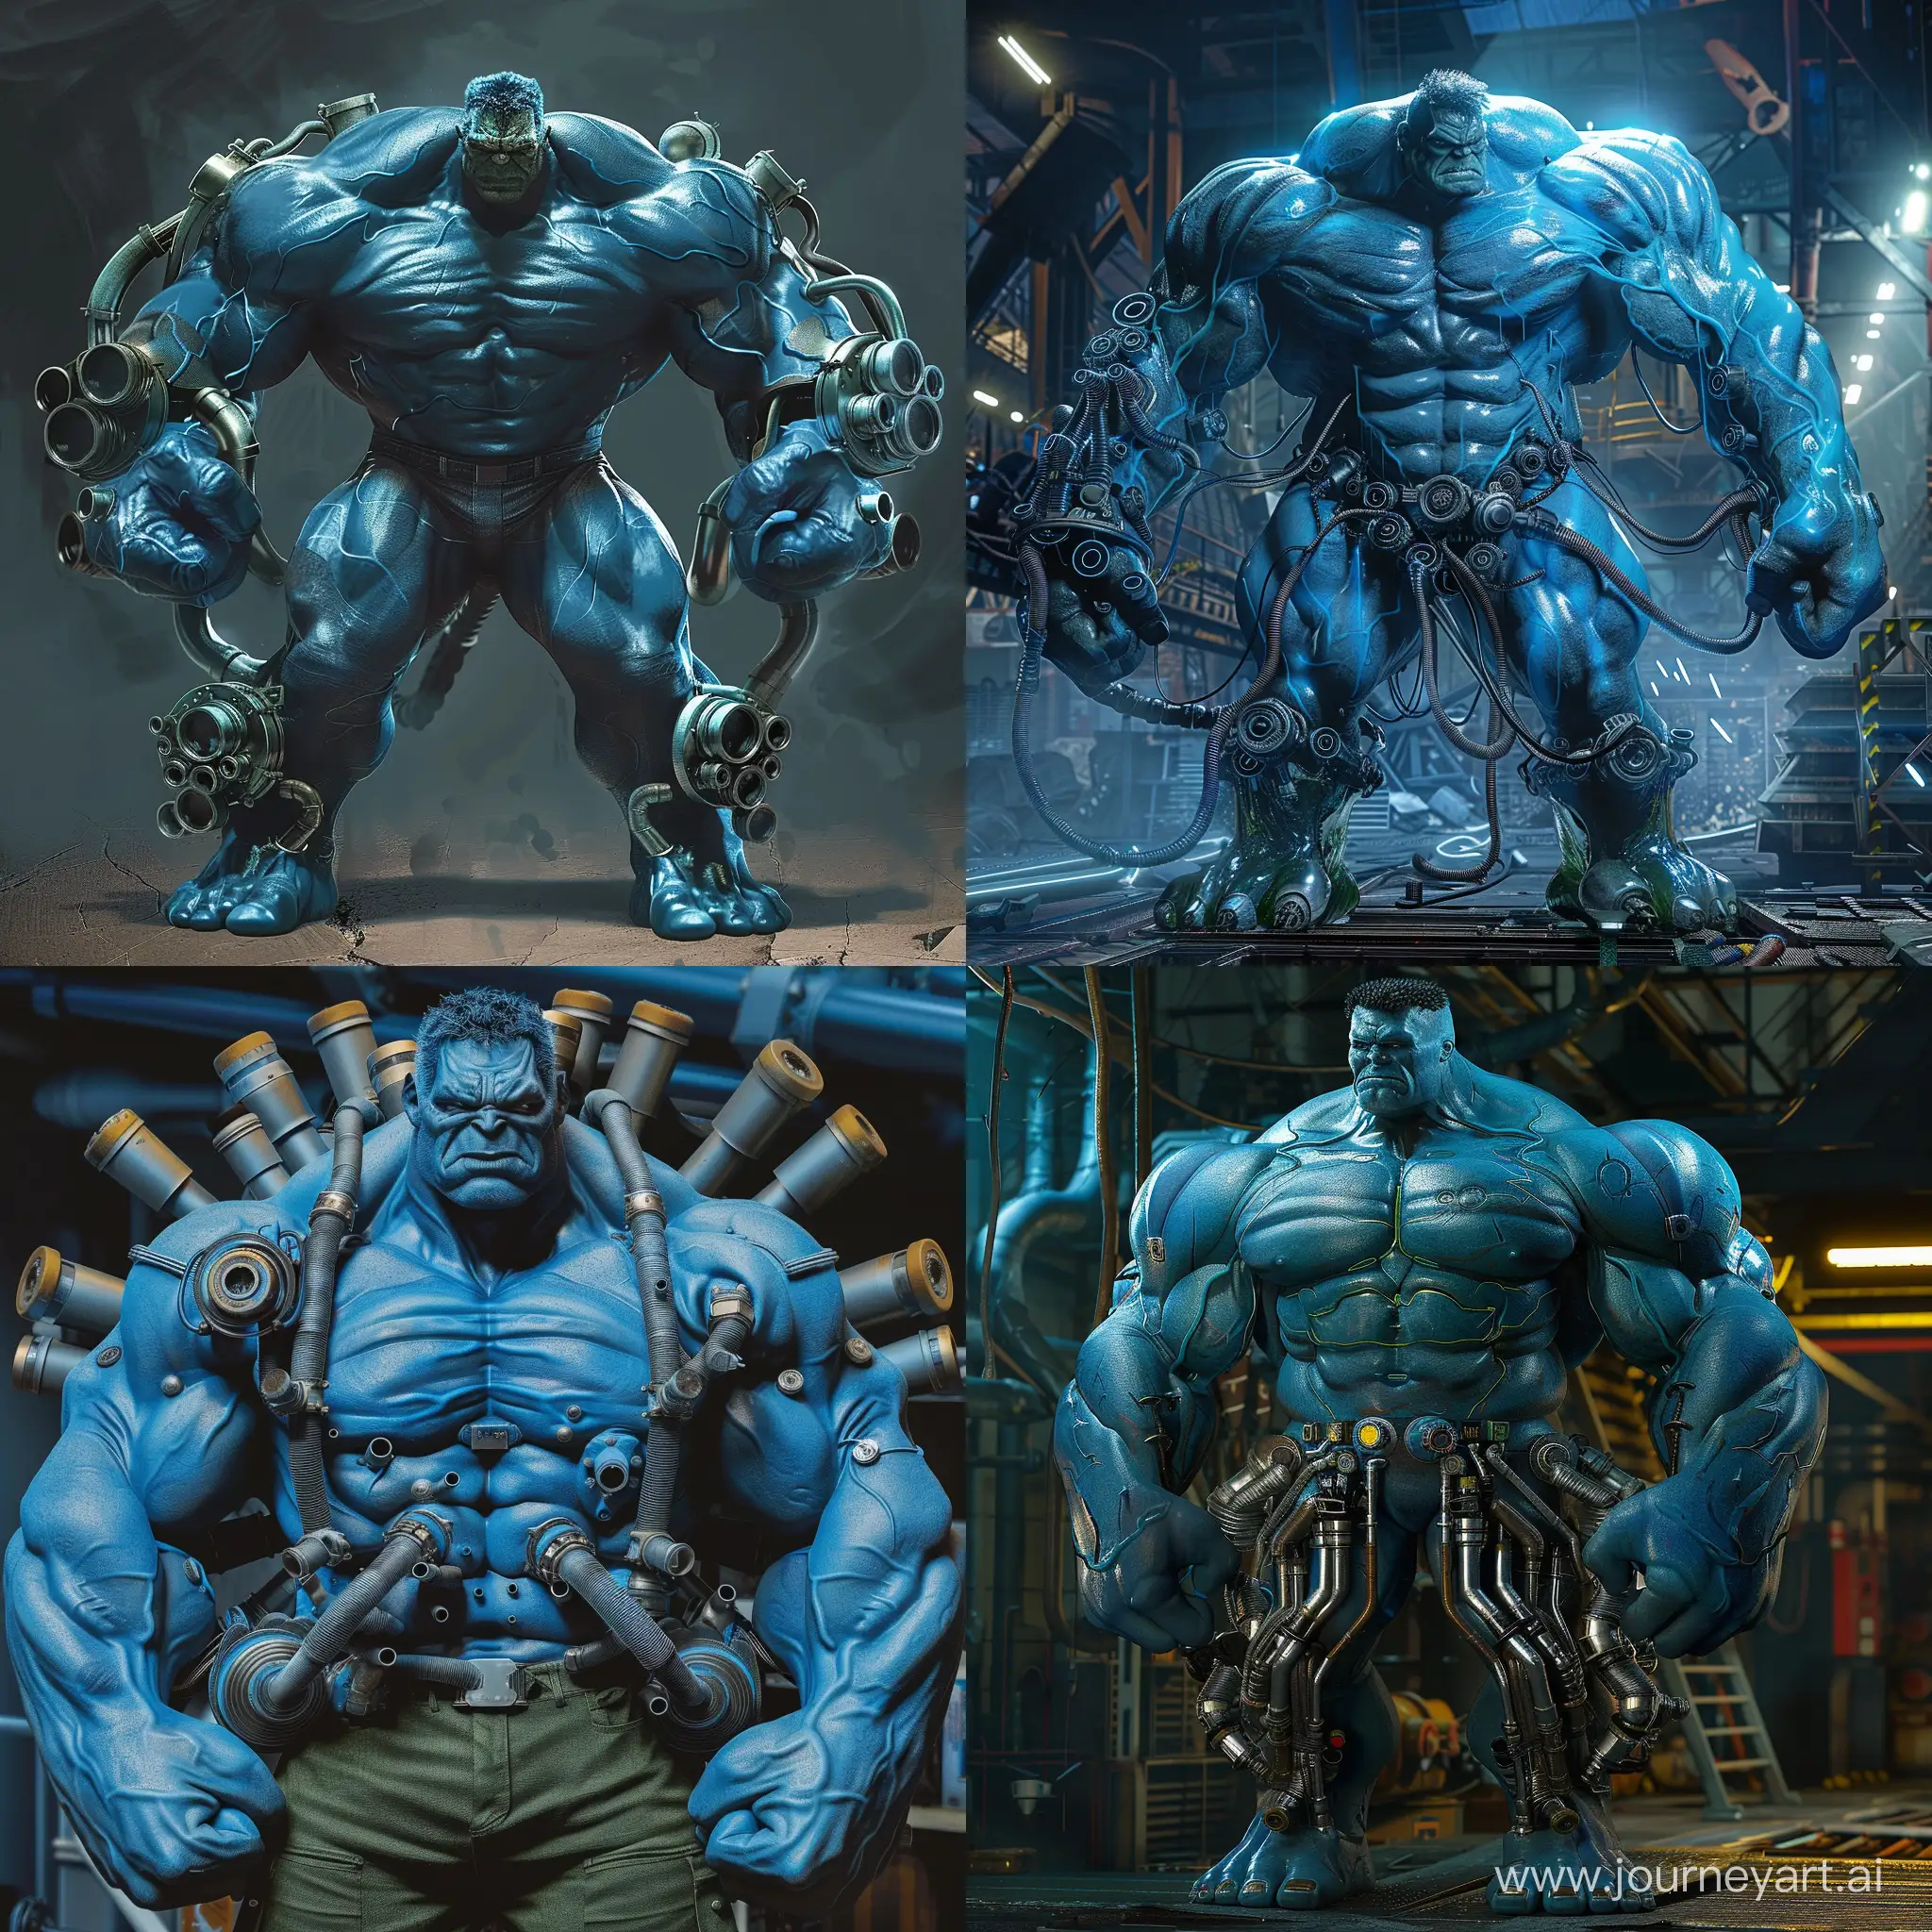 Powerful-Blue-Hulk-Surrounded-by-Intricate-Pipes